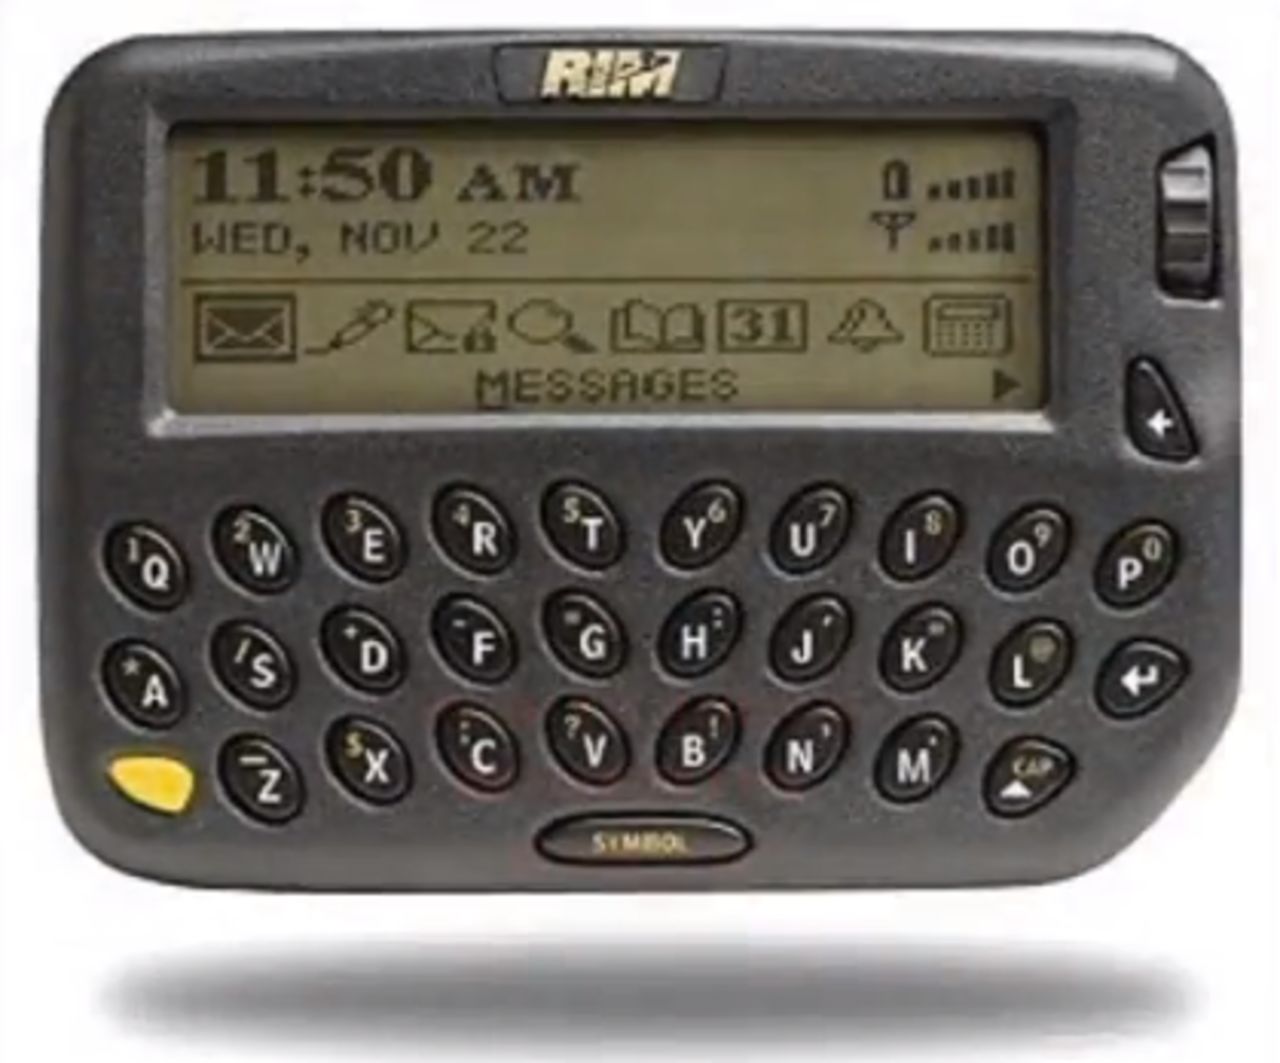 The first BlackBerry phone was released by RIM Corporation in 1999. The phone was unusual at the time in that it had a full keyboard, could access e-mail and was used as a personal planner. It was the beginning of the always-connected era, prompting PC World in 2005 to name it the 15th greatest gadget of the past 50 years. It's now known as a "CrackBerry" by corporate executives across the world for its addictive qualities. 